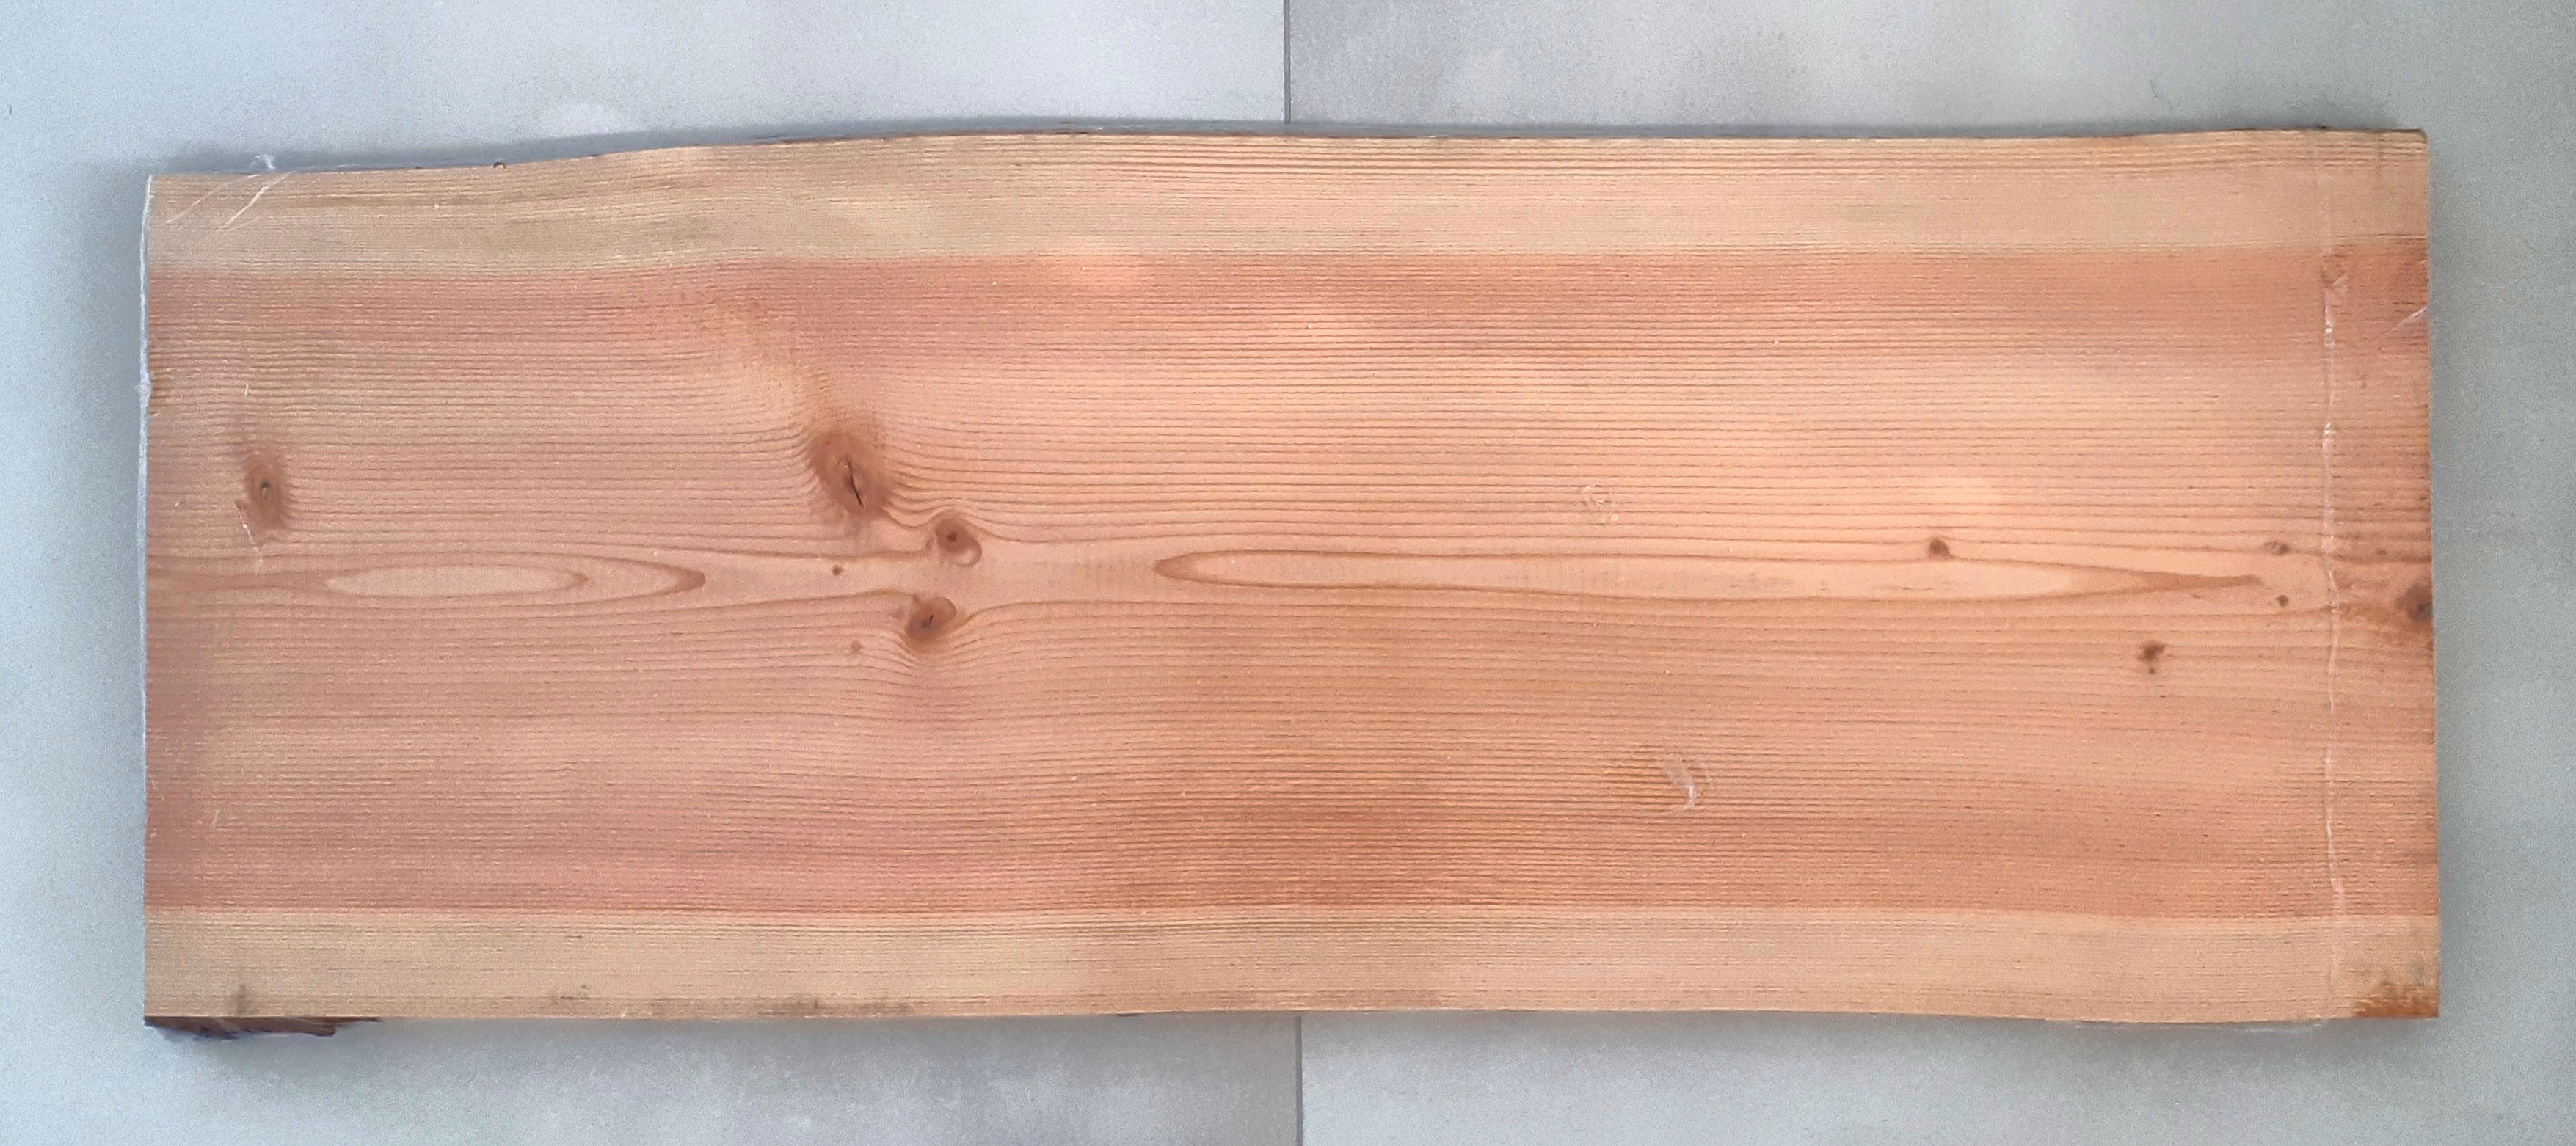 A photo of a timber slab from a Douglas Fir tree laying on grey tiles.